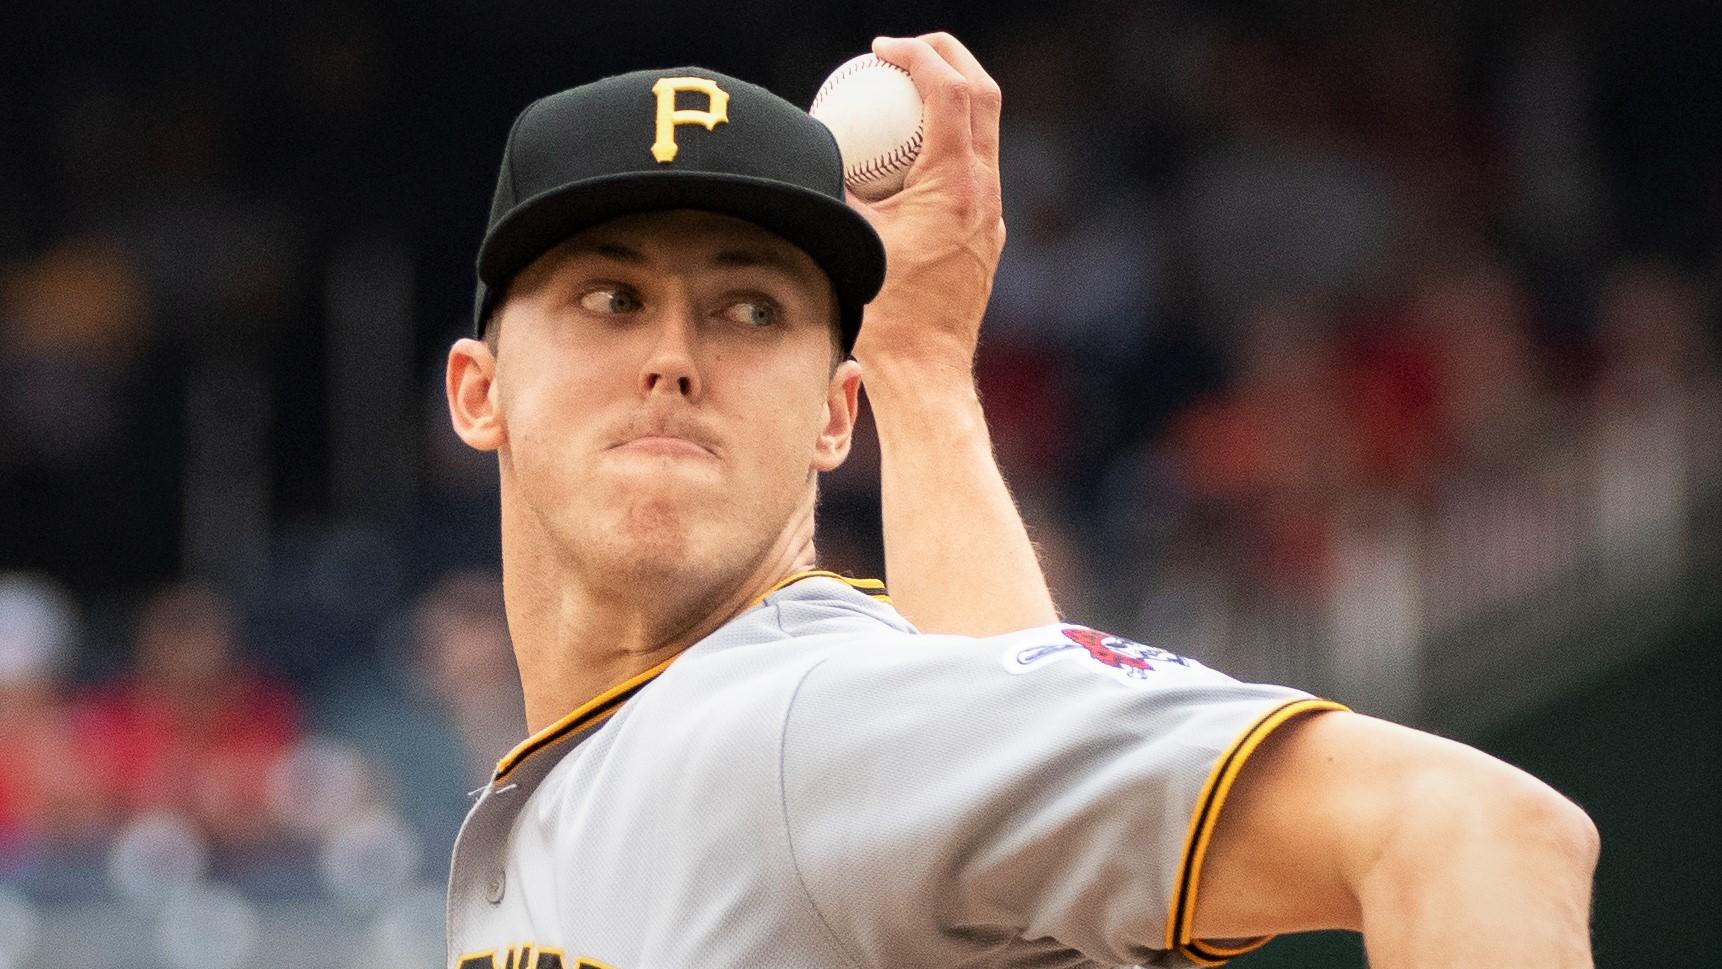 Apr 14, 2019; Washington, DC, USA; Pittsburgh Pirates starting pitcher Jameson Taillon (50) delivers a pitch during the first inning against the Washington Nationals at Nationals Park. Mandatory Credit: Tommy Gilligan-USA TODAY Sports / © Tommy Gilligan-USA TODAY Sports